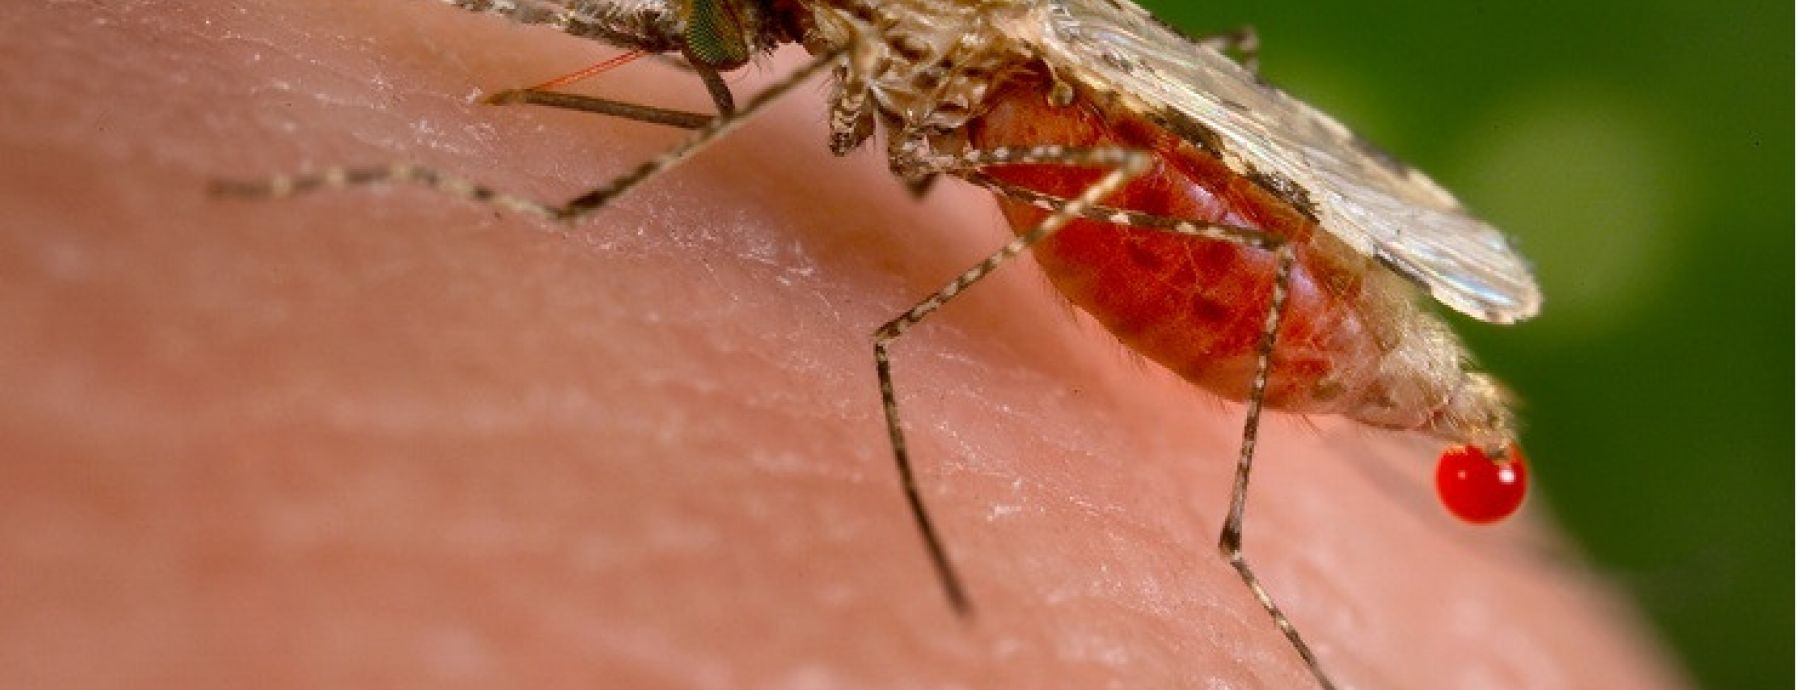 Control strategy for Dengue, malaria increases risk of West Nile virus